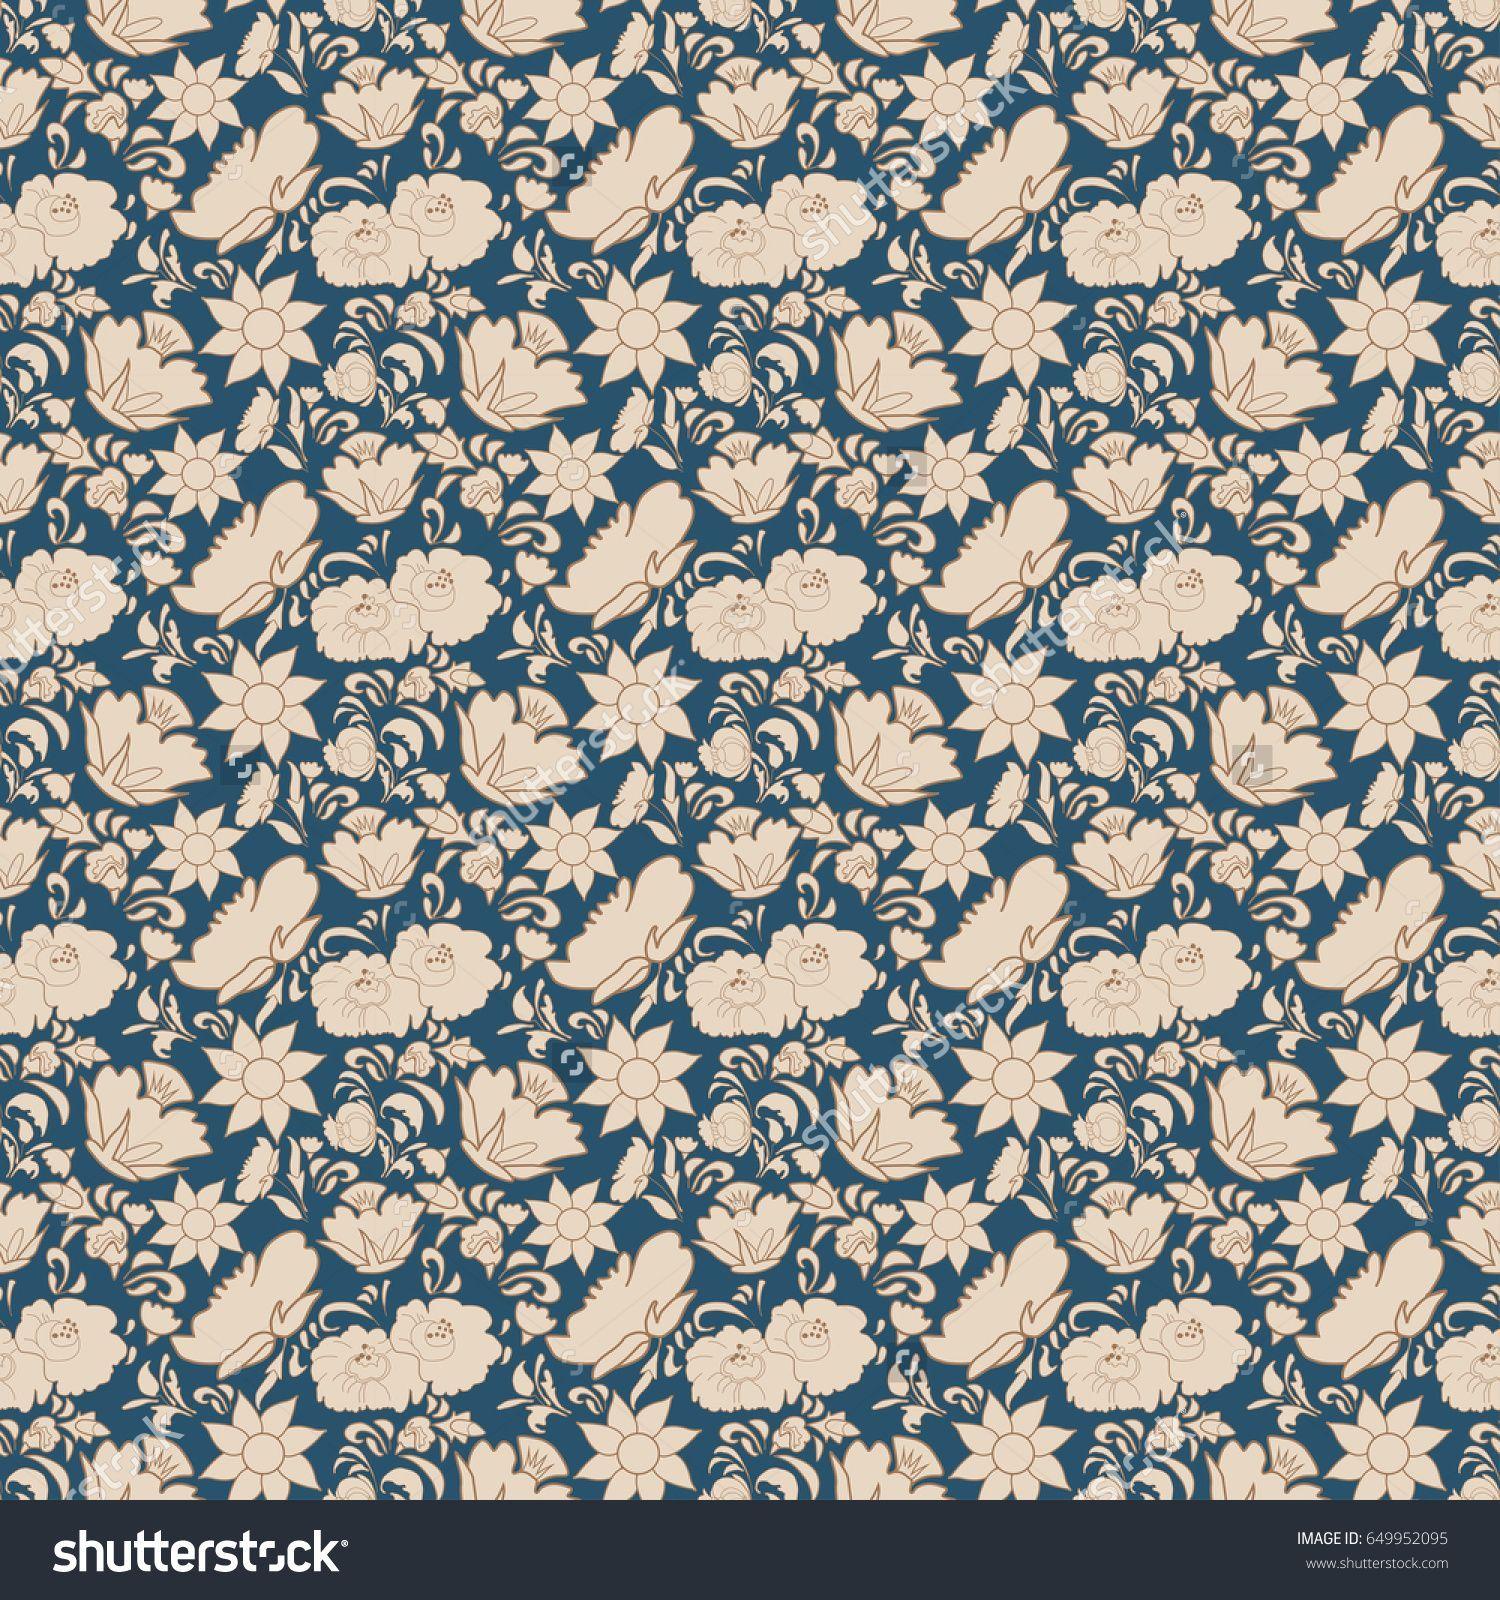 Seamless pattern with small flowers and leaves. Cute, simple